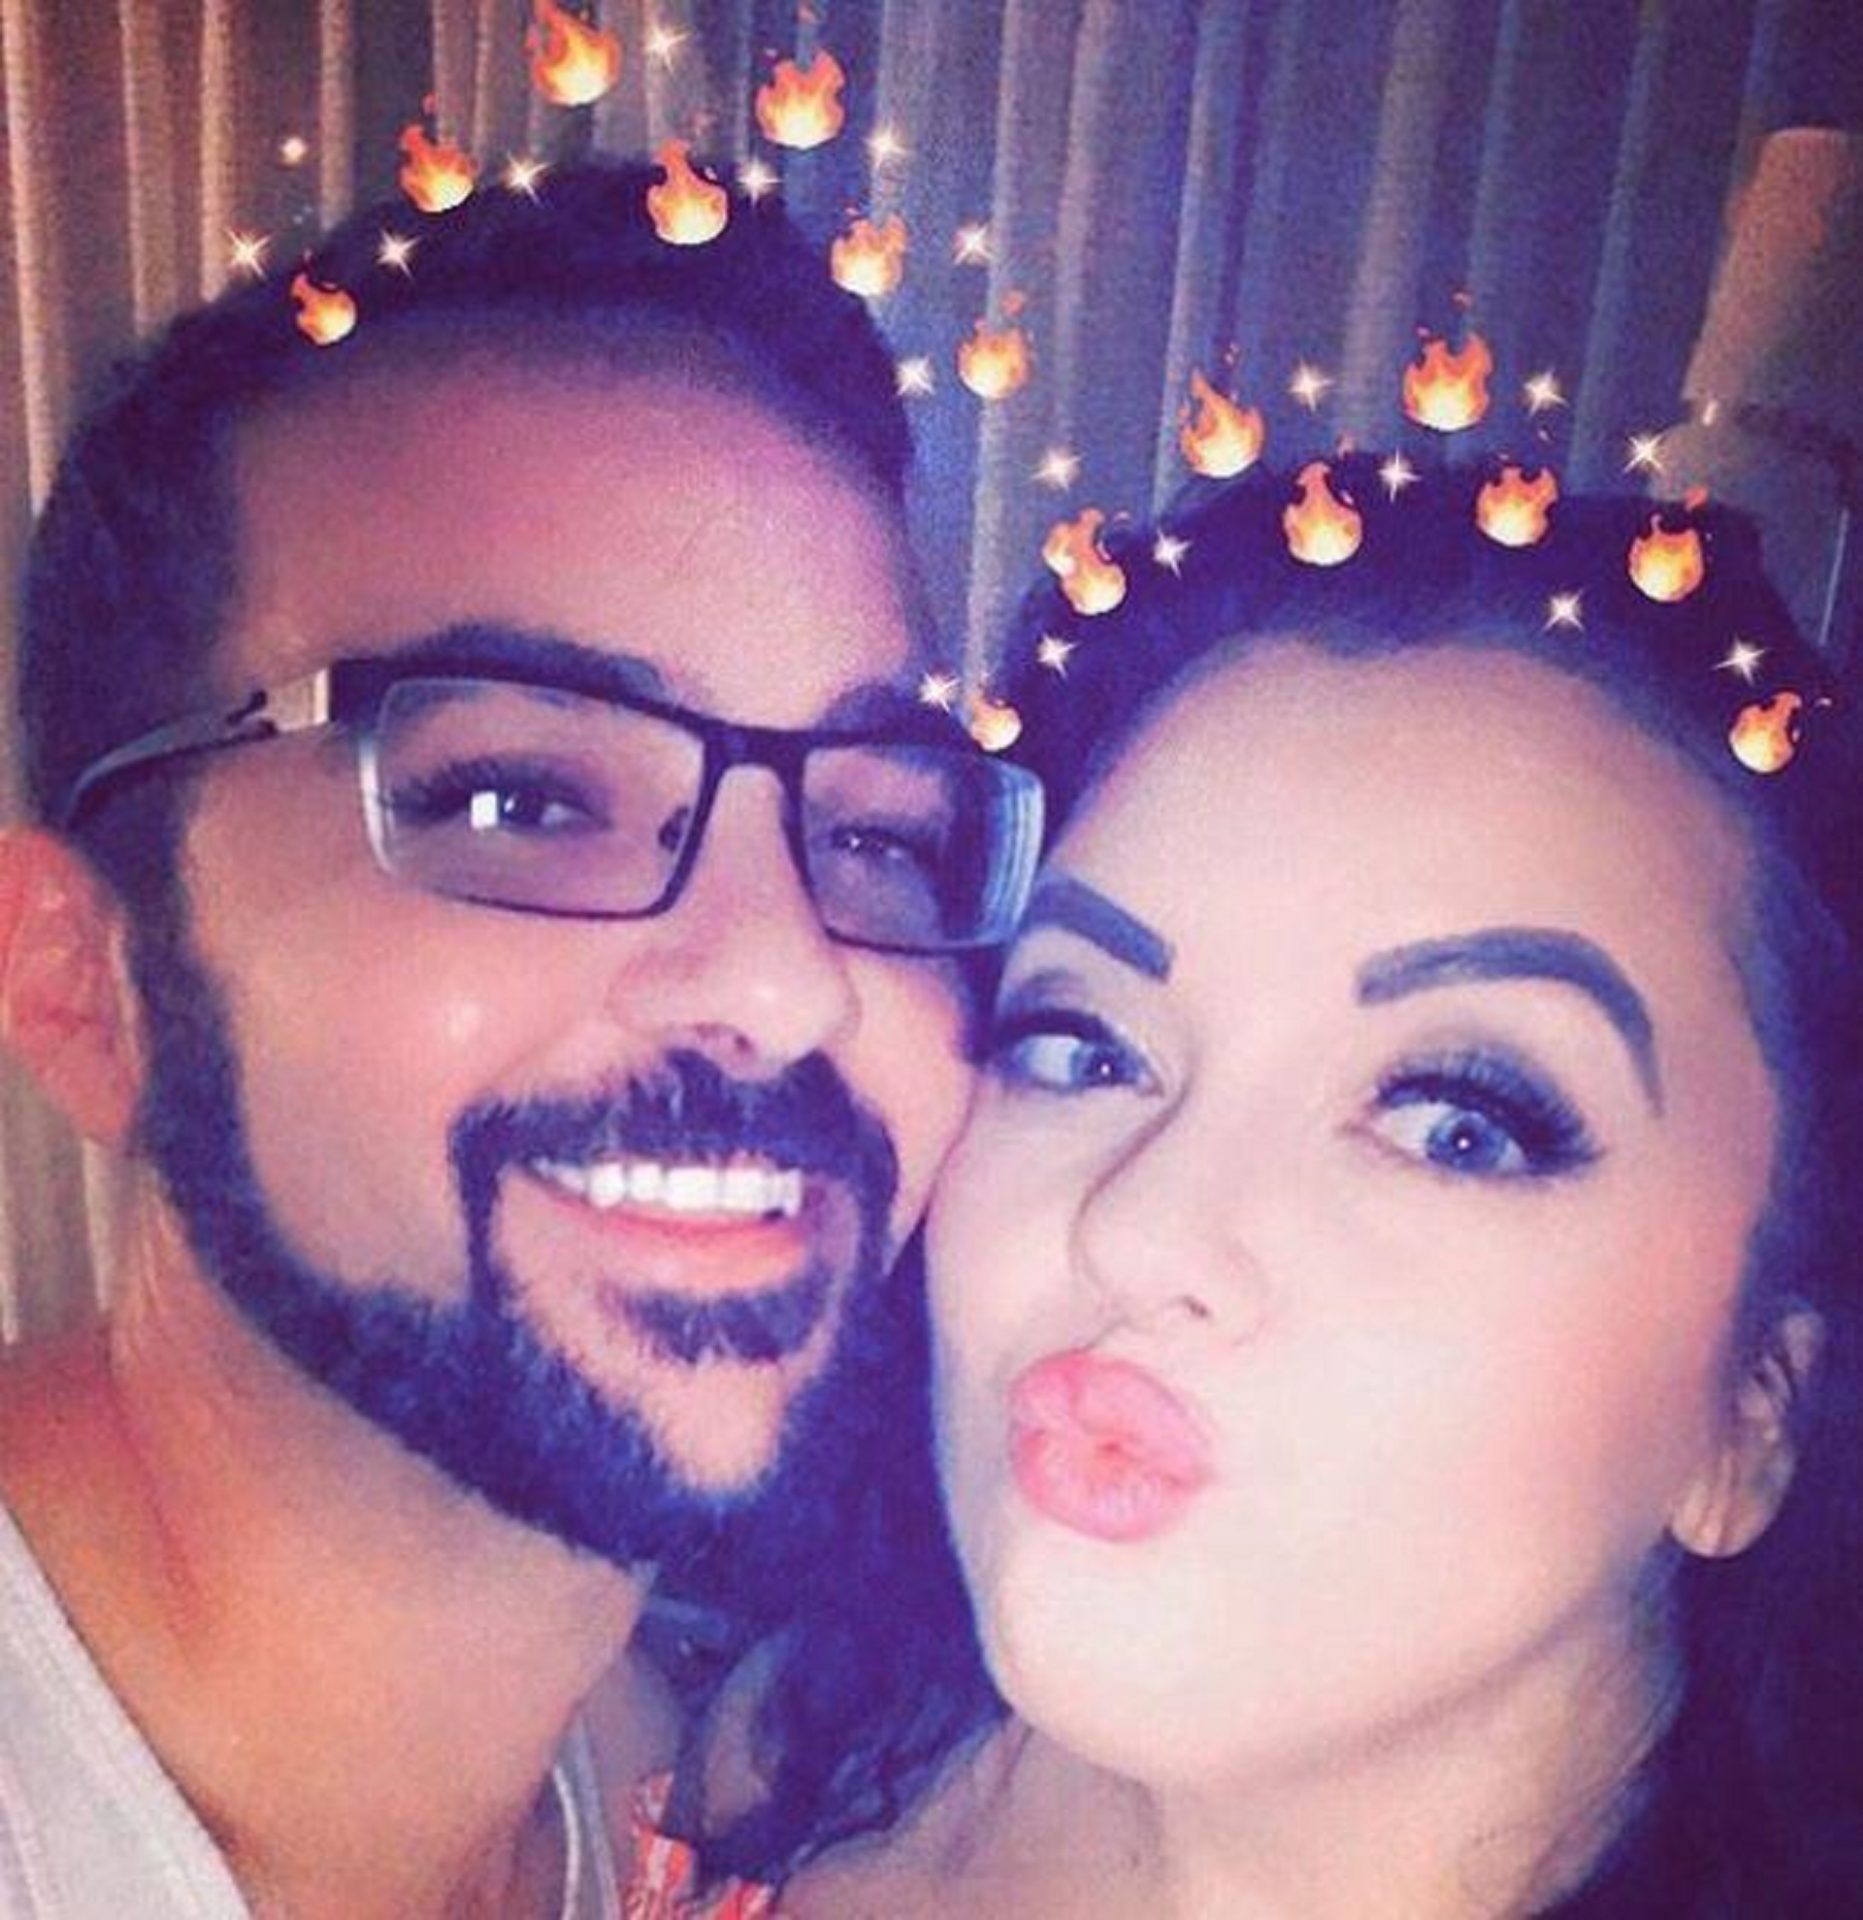 Instagram selfie of Kerie Trimble and her husband John. Trimble often posts photos of her and her John, along with videos and images of her preforming burlesque.